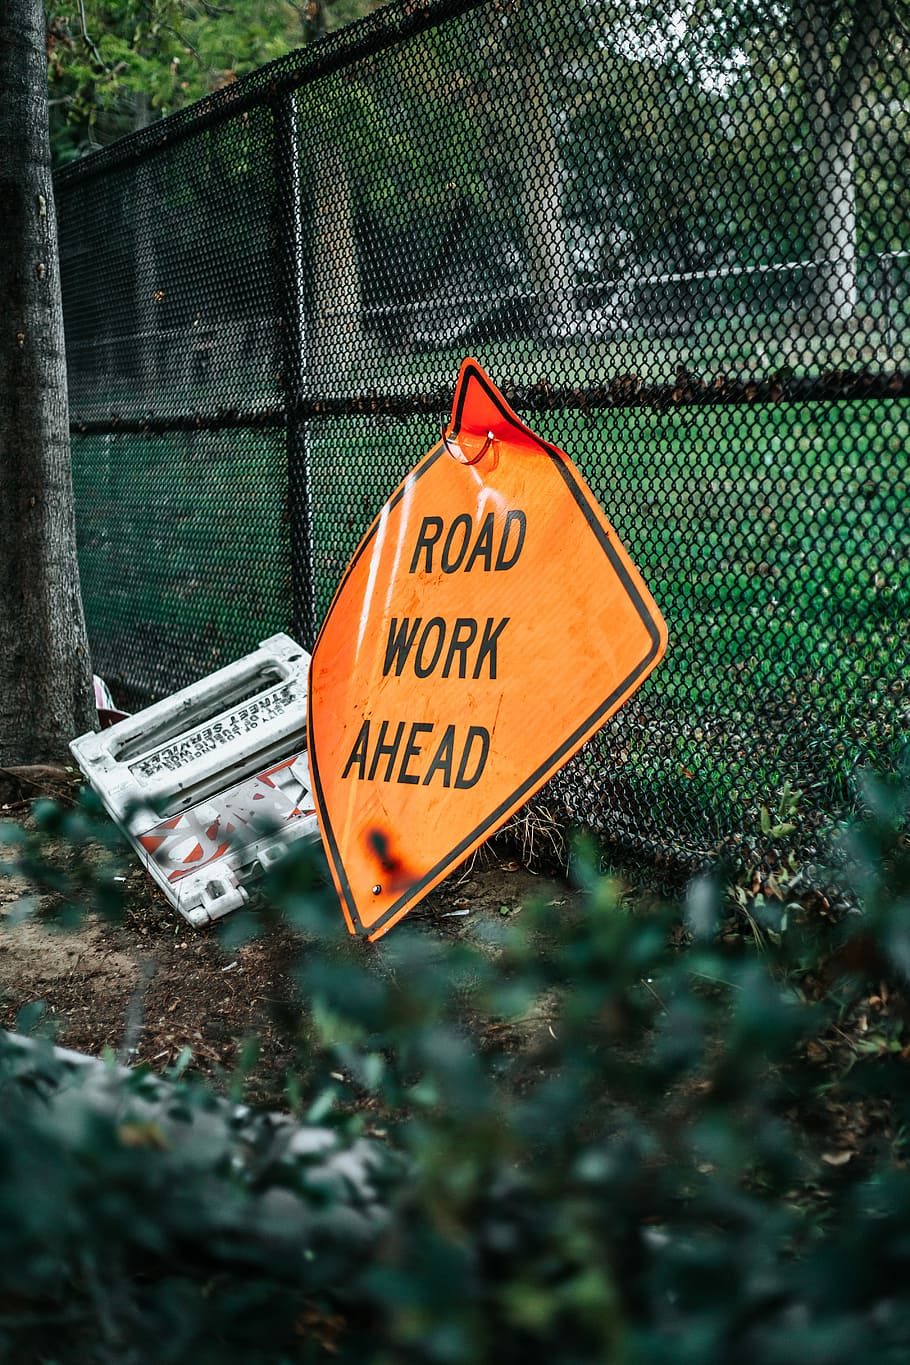 road work ahead signage leaning on chain link fence, road work ahead signage, HD wallpaper